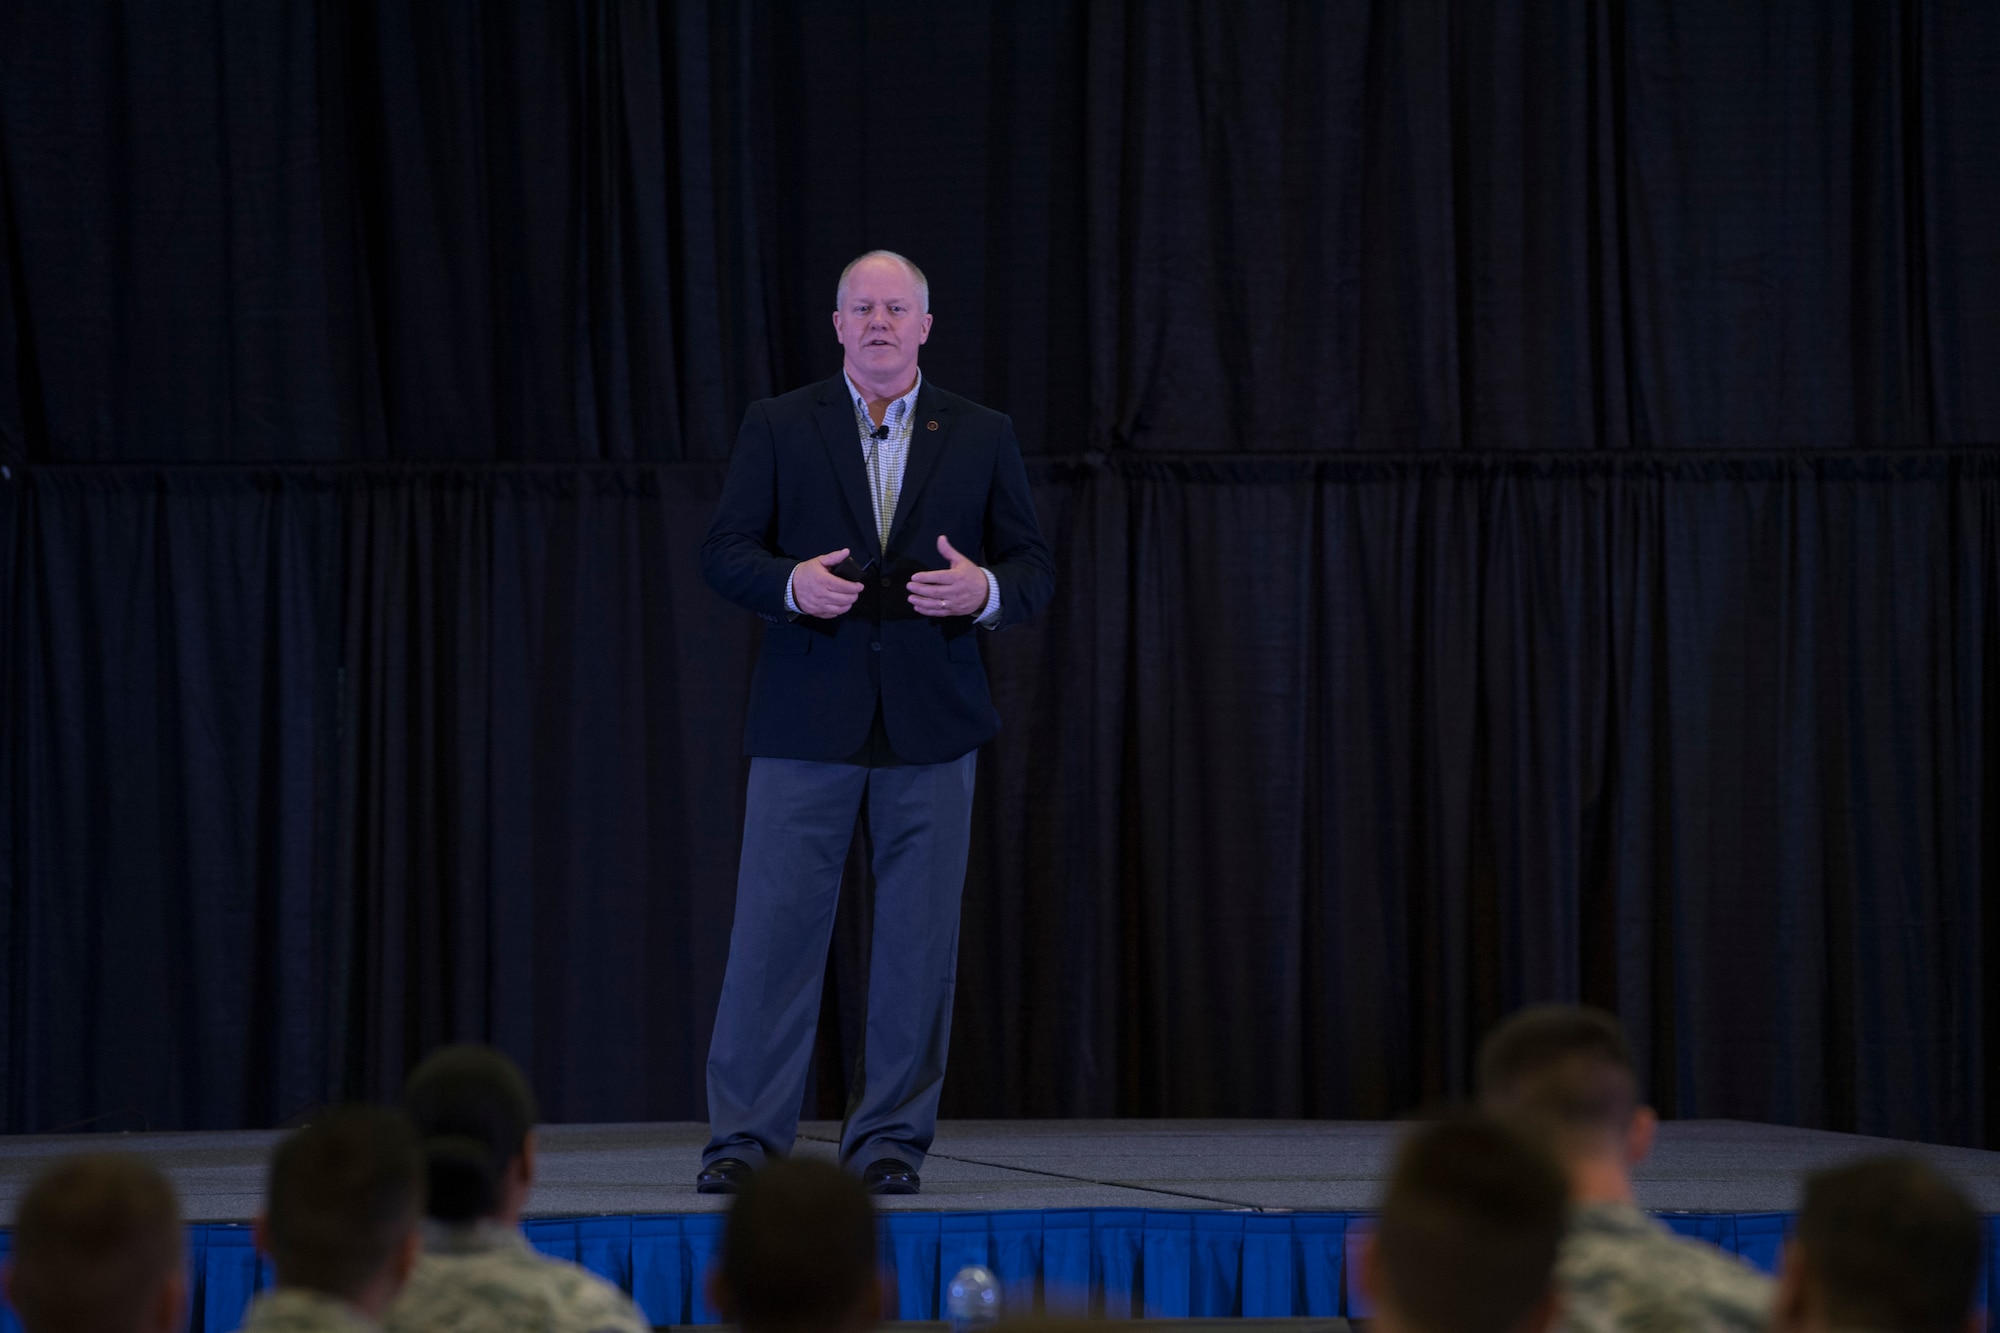 Chief Master Sgt. Chris Muncy (Ret.), former Command Chief Master Sgt. of the Air National Guard, talks with Airmen August 15, 2018 at the Enlisted Leadership Symposium at Camp Dawson, W.Va. More than 400 Airmen representing Air National Guard units from each state and territory attended the ELS, a three-day event focused on leadership and professional development. (U.S. Air National Guard Photo by Airman 1st Class Caleb Vance)